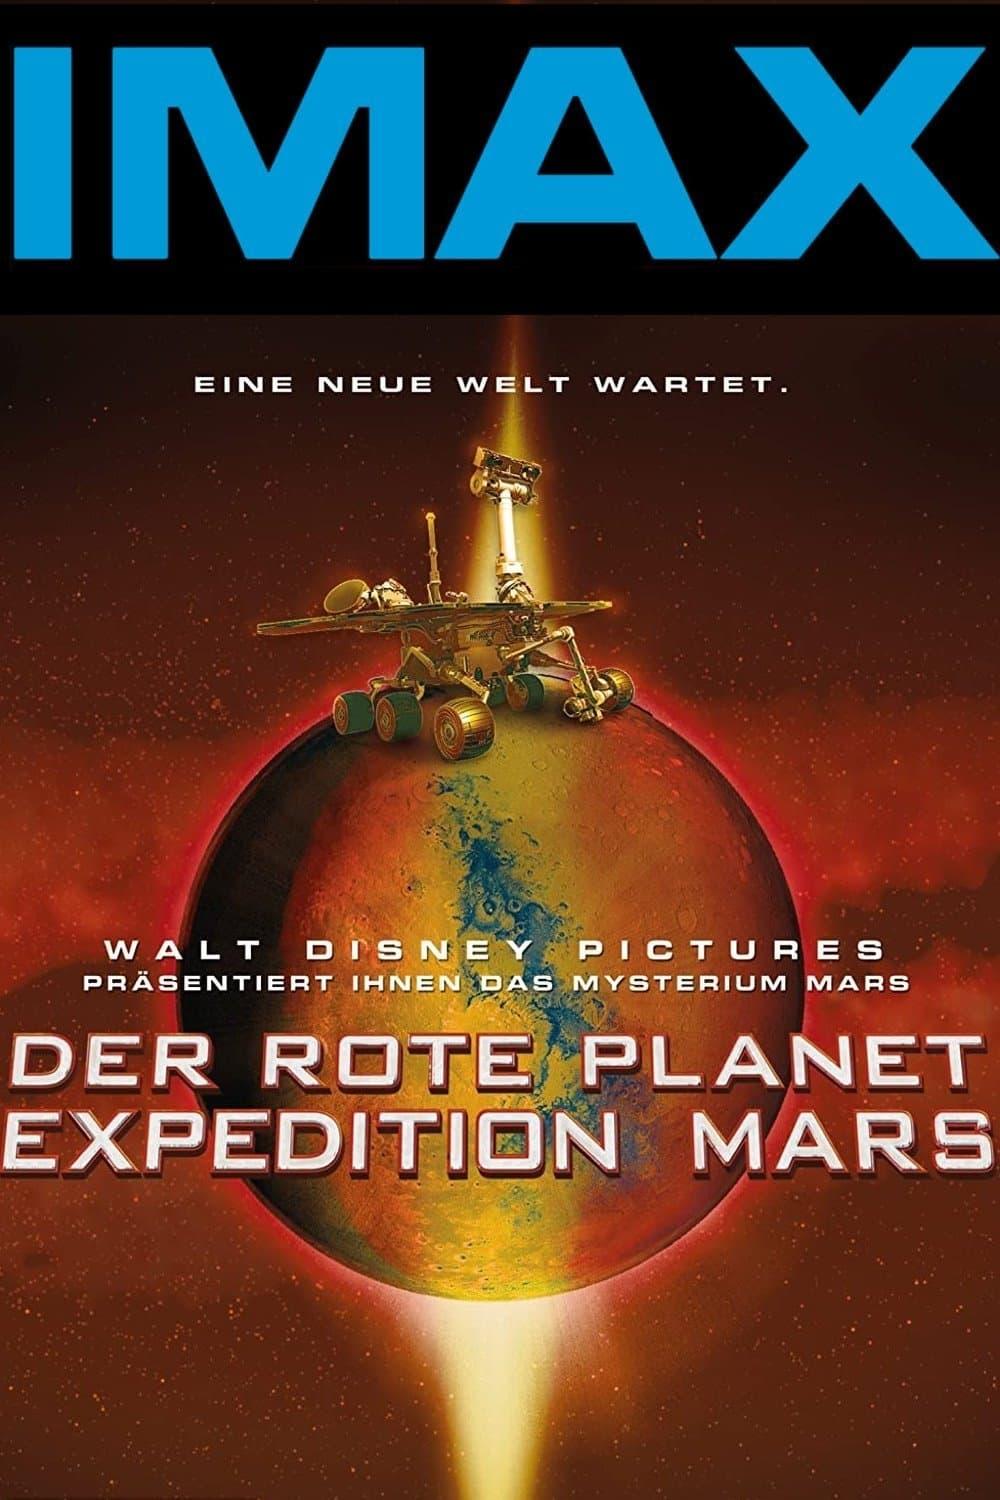 Der rote Planet - Expedition Mars poster